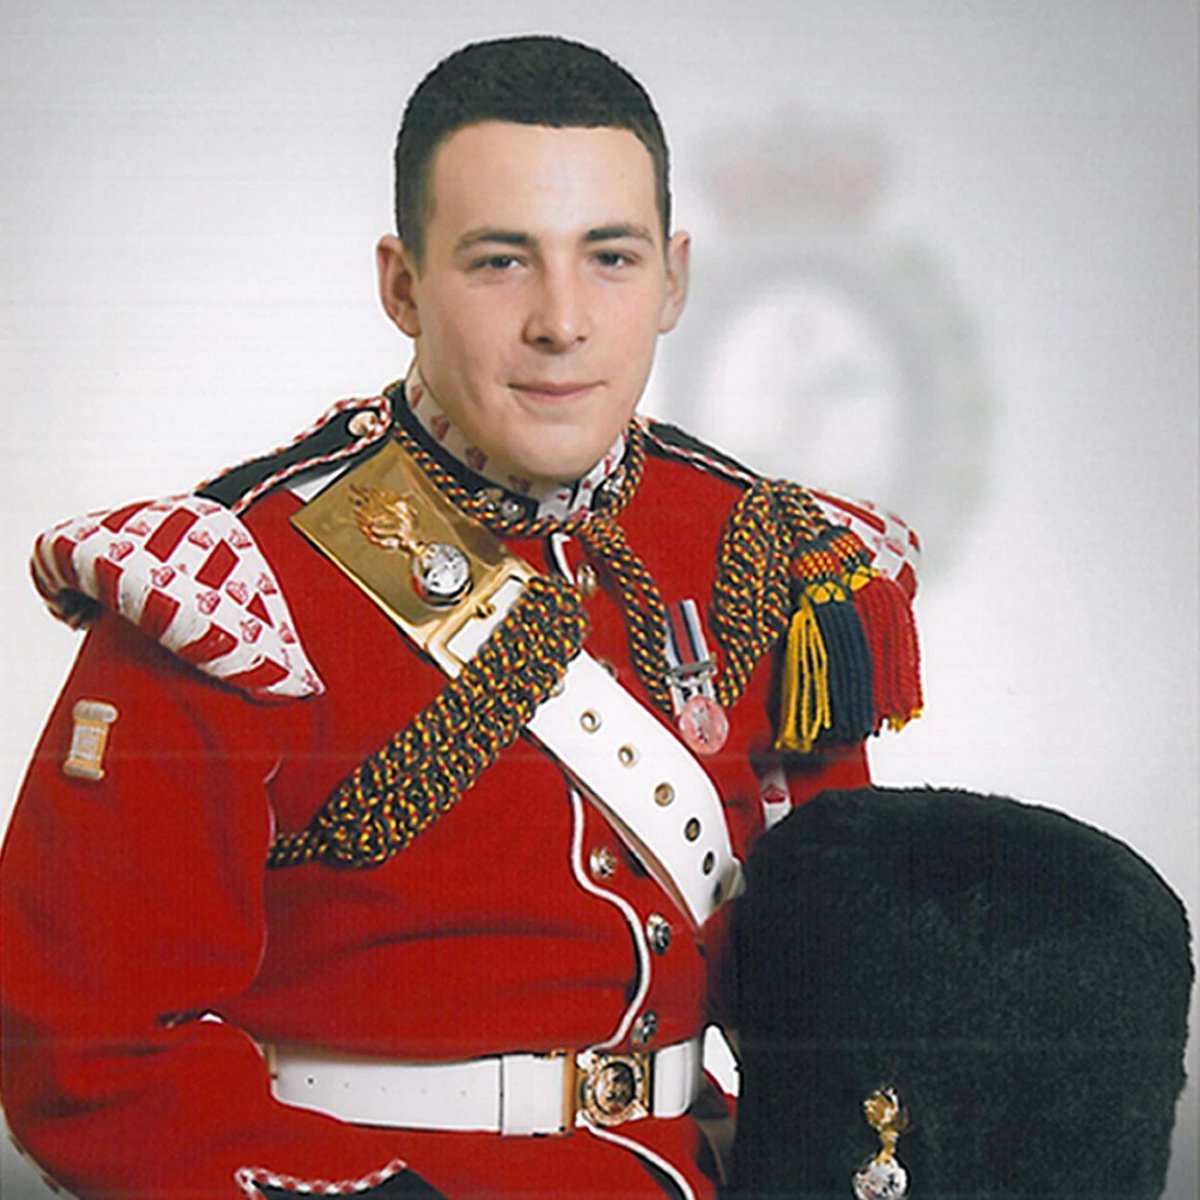 We have Nicola Bulley on our minds but give this guy a thought 

A ex soldier in Army 💙 

Lee Rigby is trending 

My thoughts goes out 🙏 

#NicolaBulley #LeeRigby